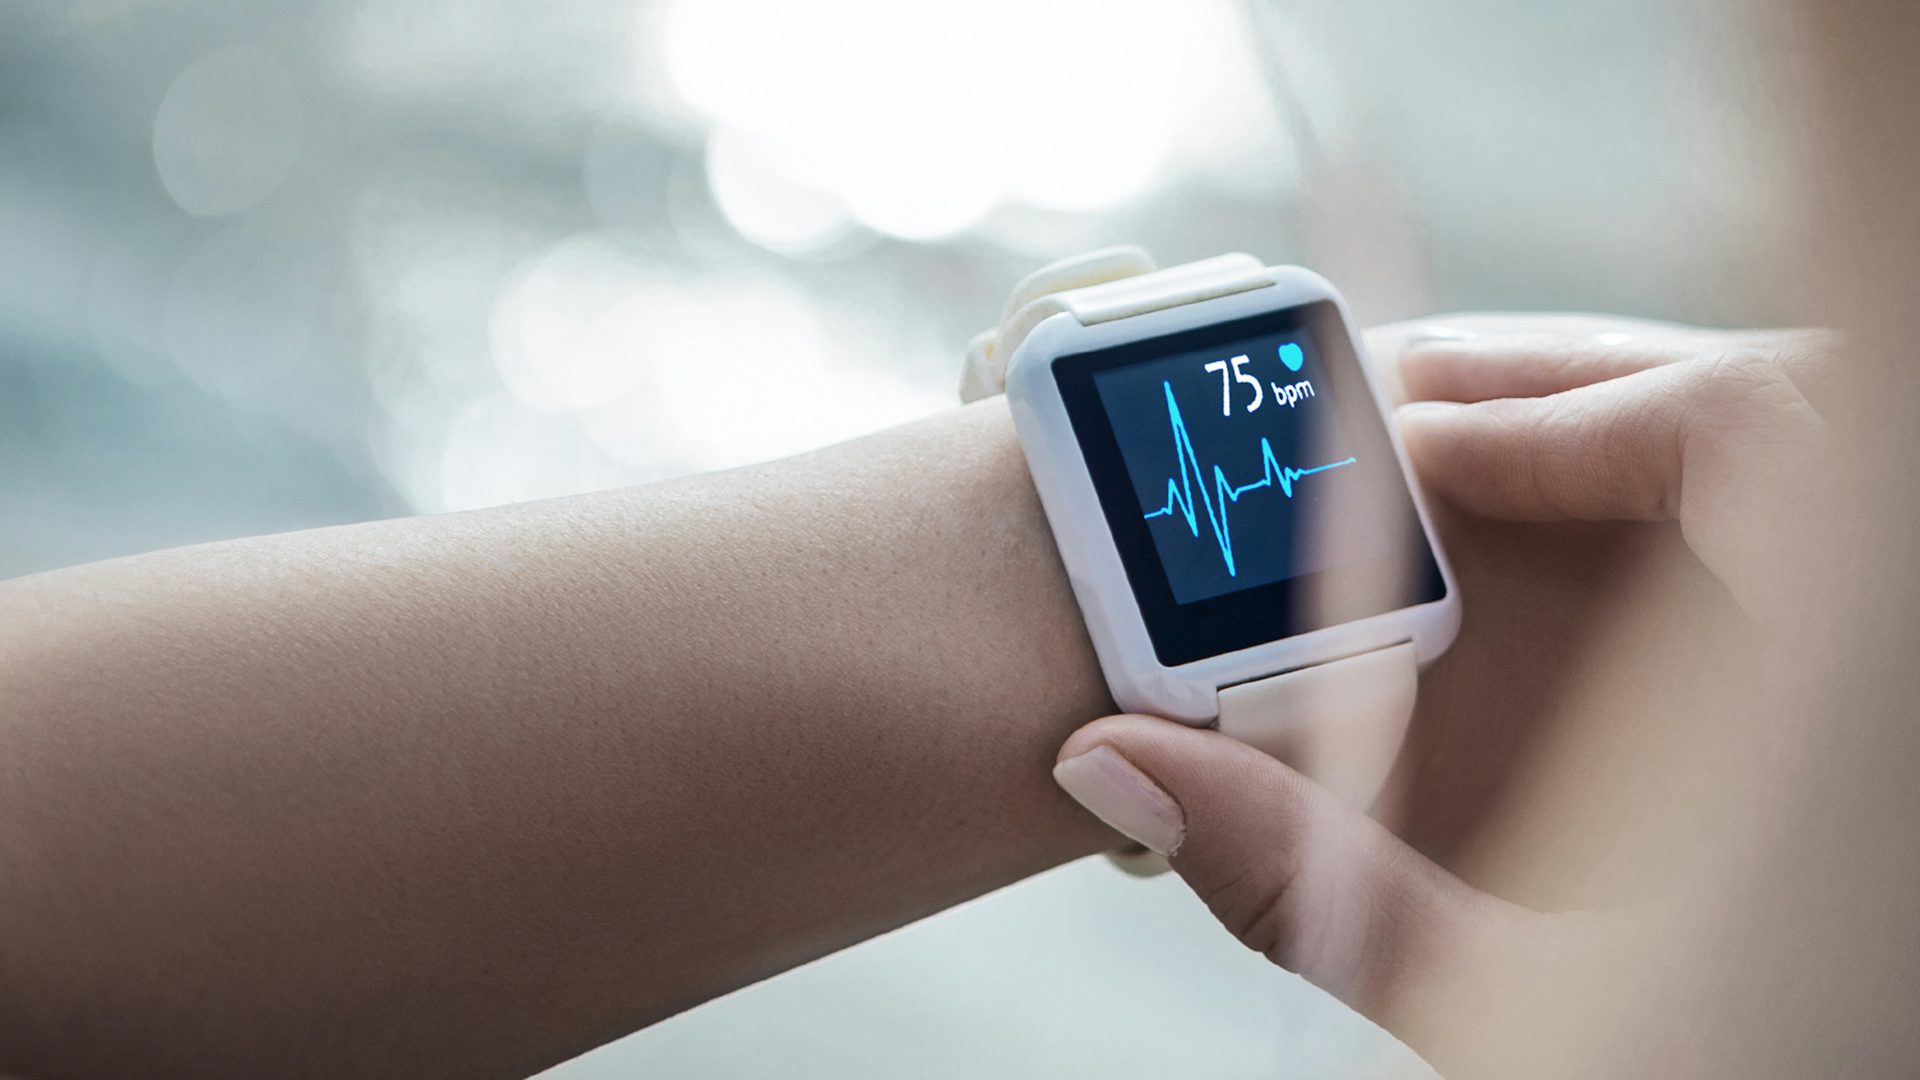 Image of a person's wrist wearing a smart watch displaying a heart monitor.